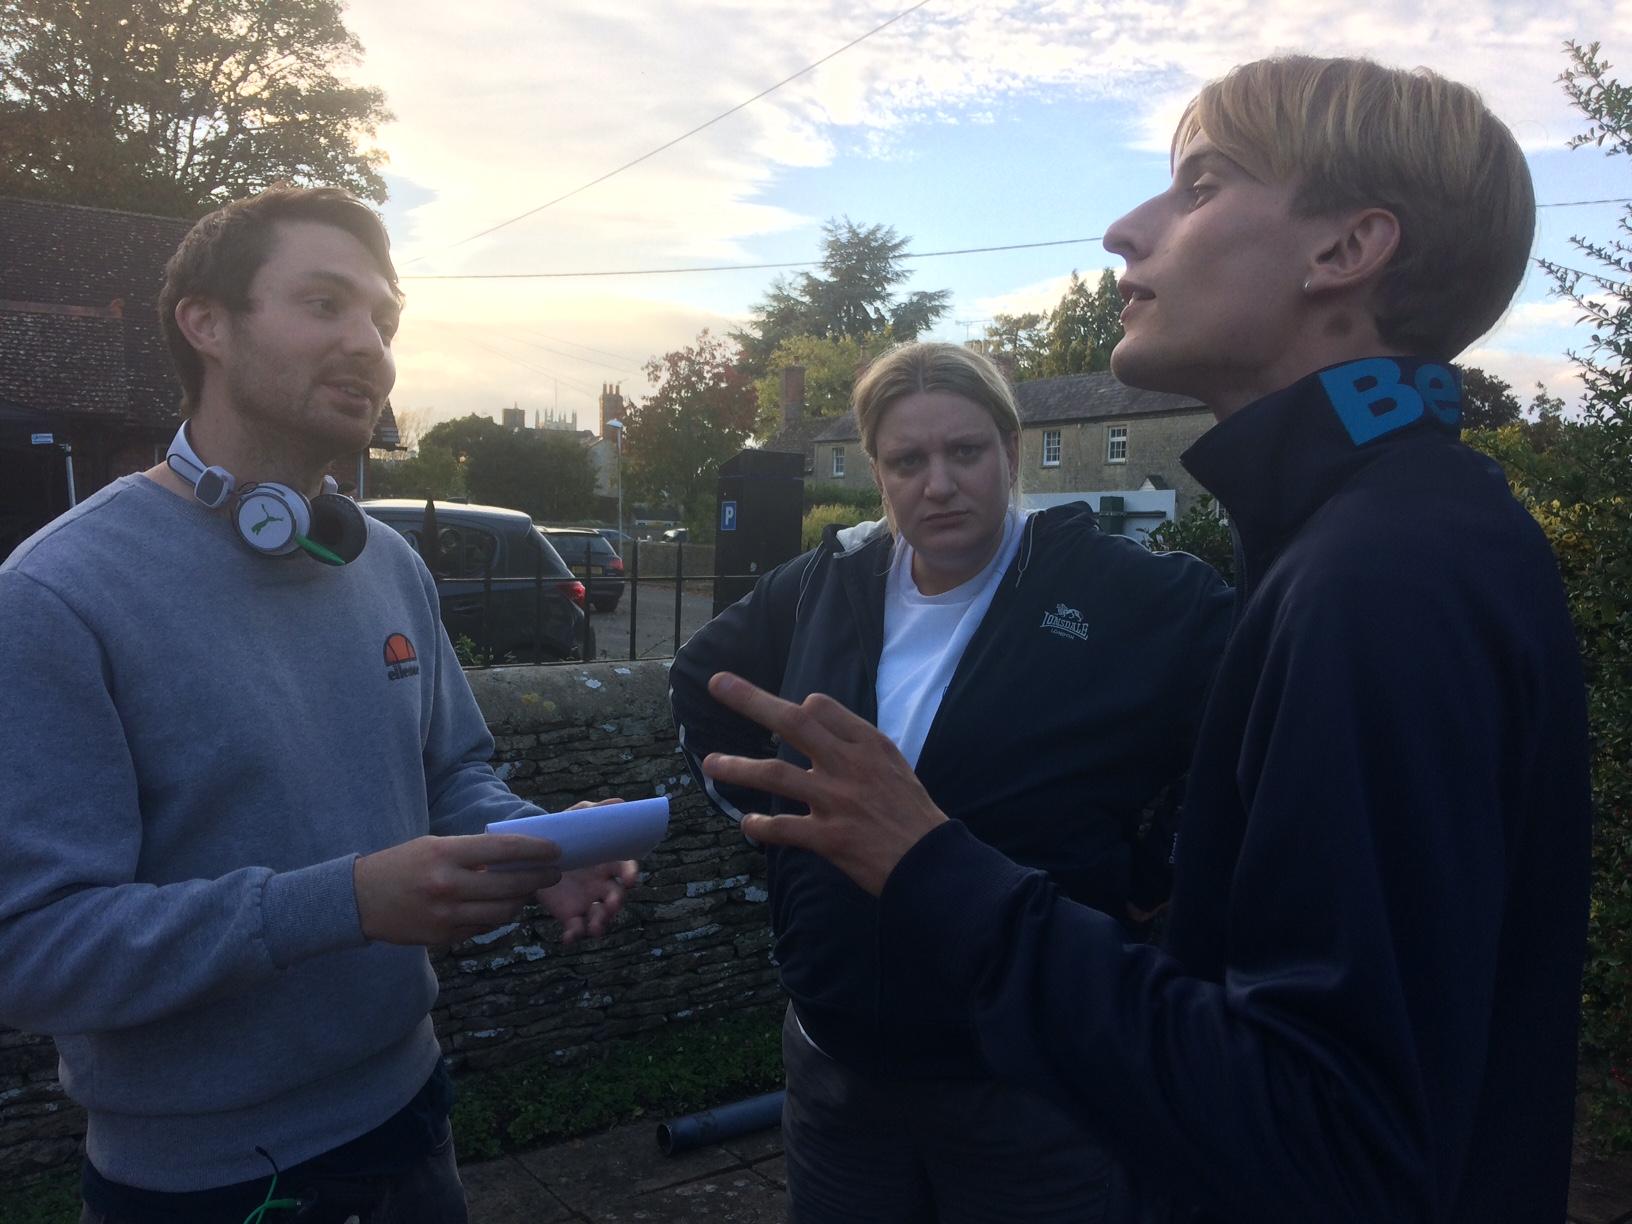 Simon Mayhew-Archer, producer, discusses filming on set with Daisy and Charlie Cooper